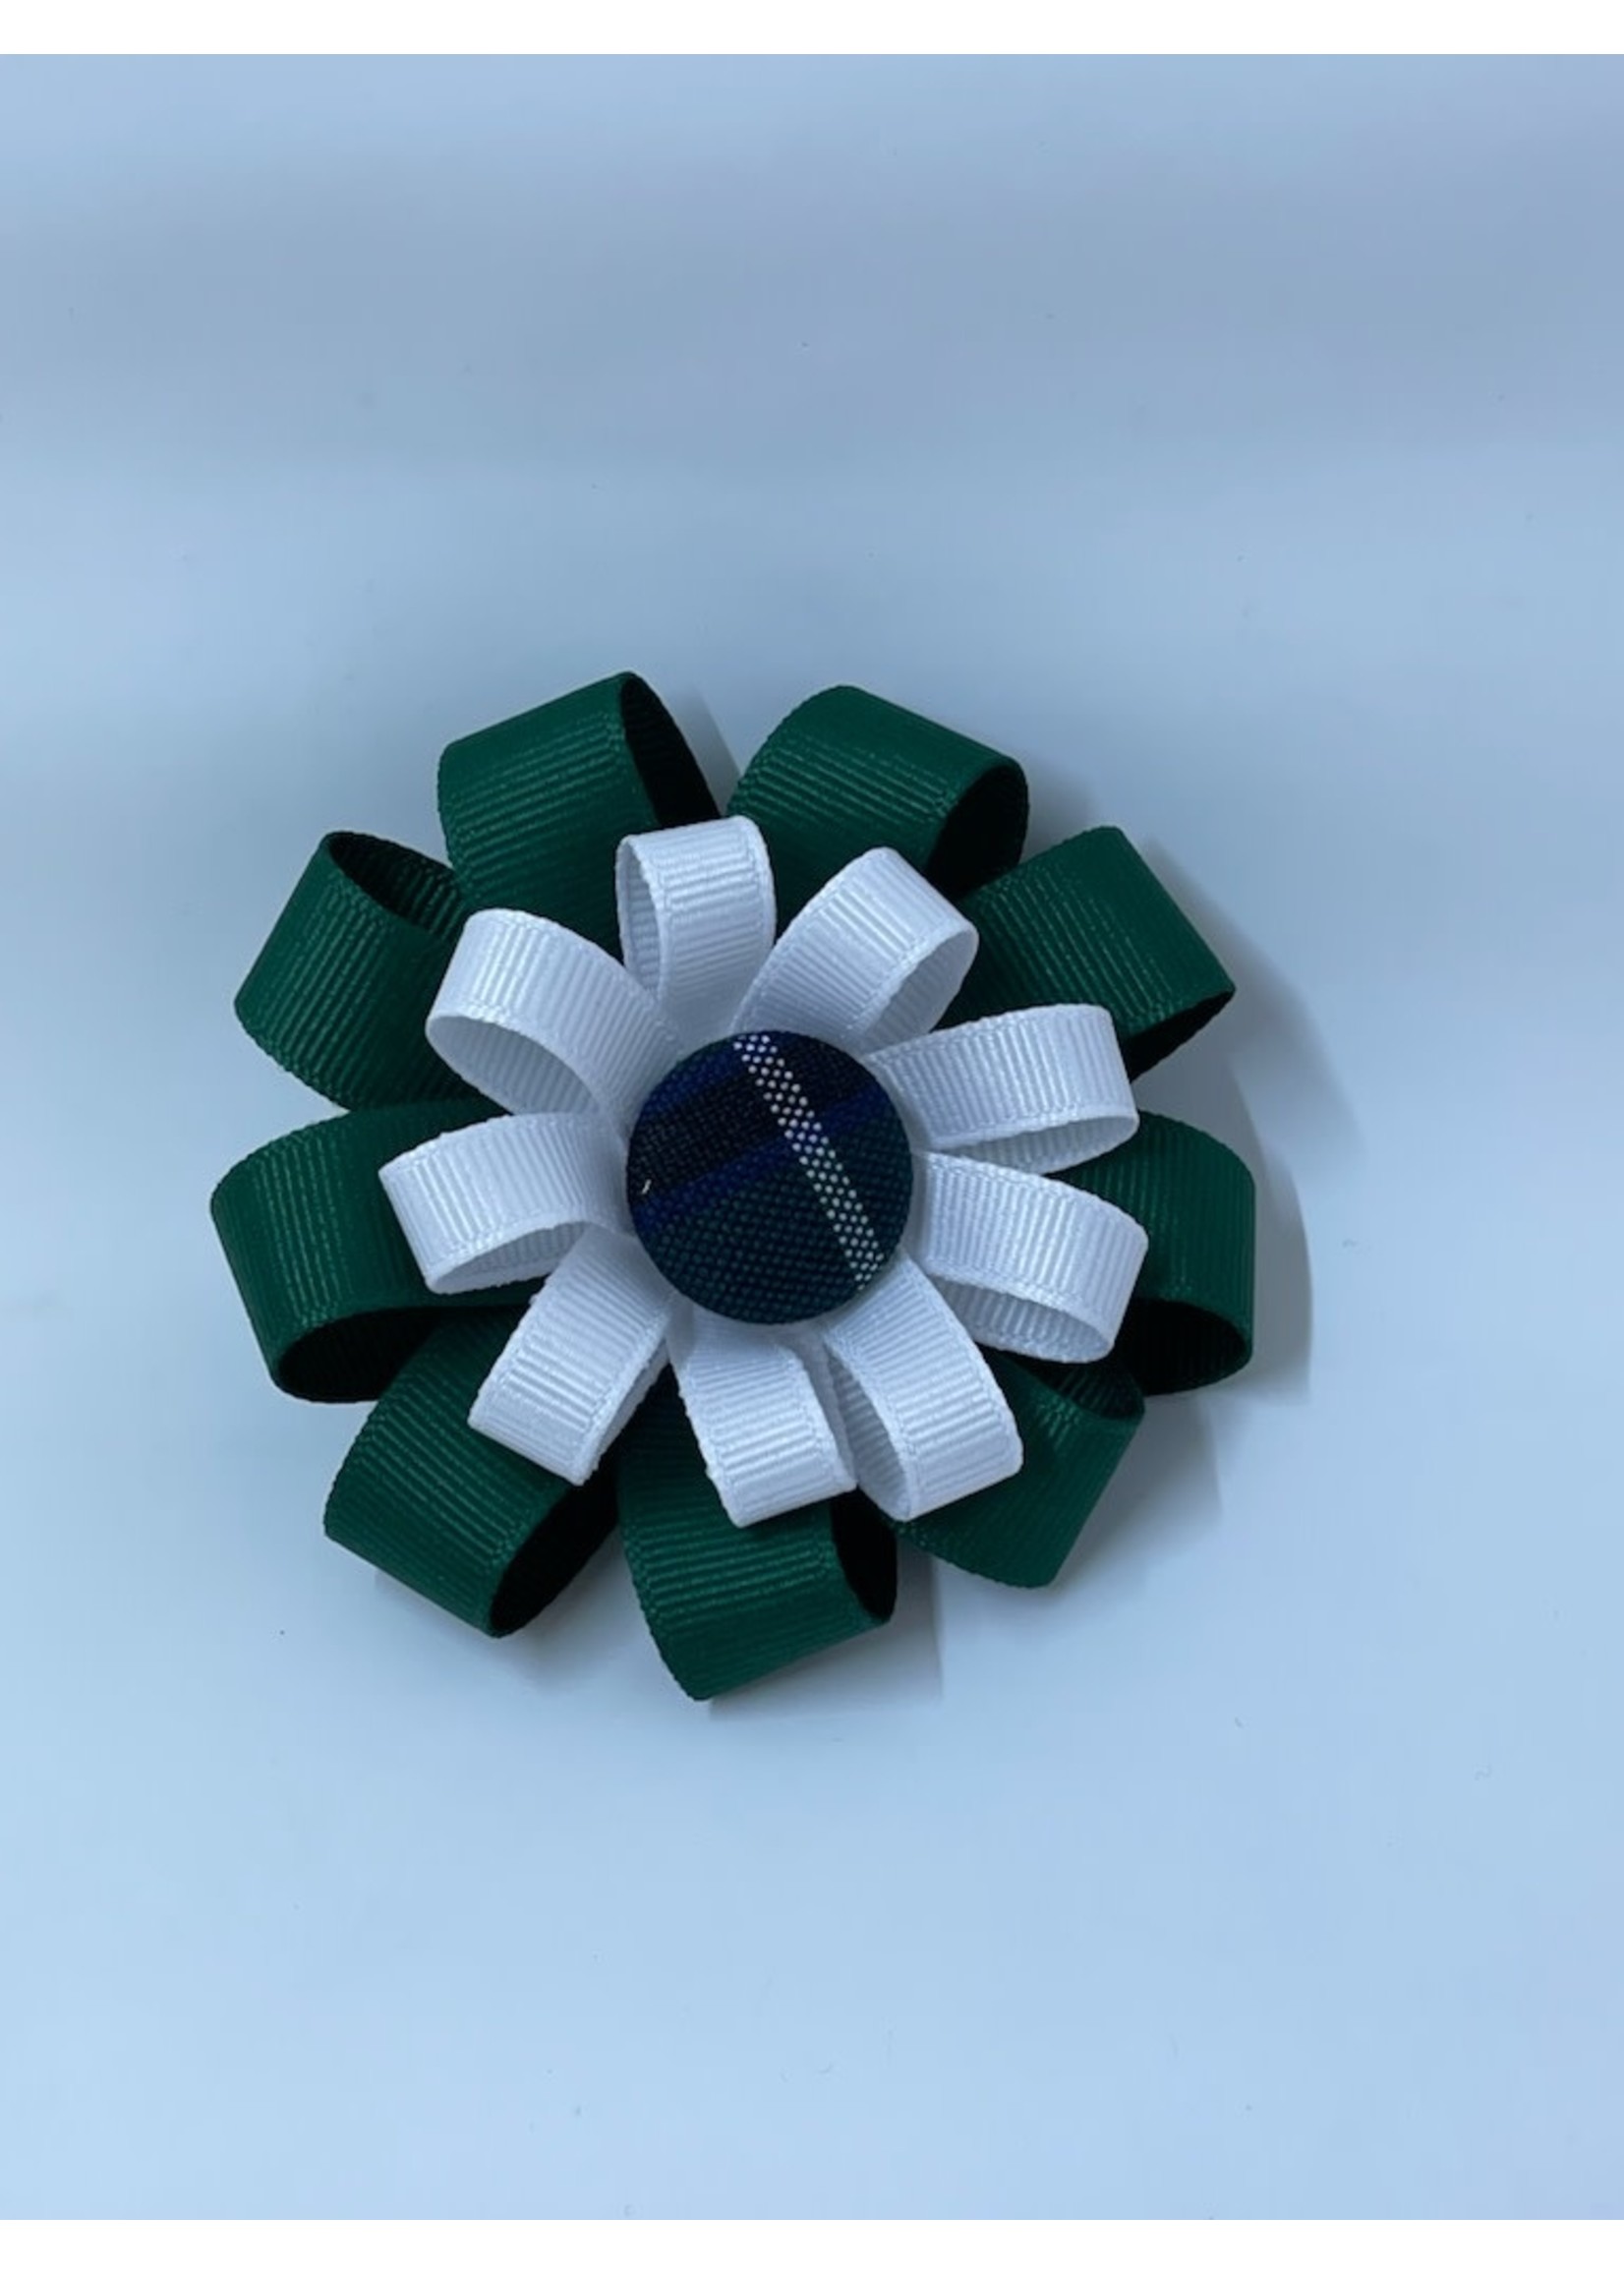 UNIFORM Hair - Button Flower Bow with Ribbon, SJB, Plaid 3 1/2" wide